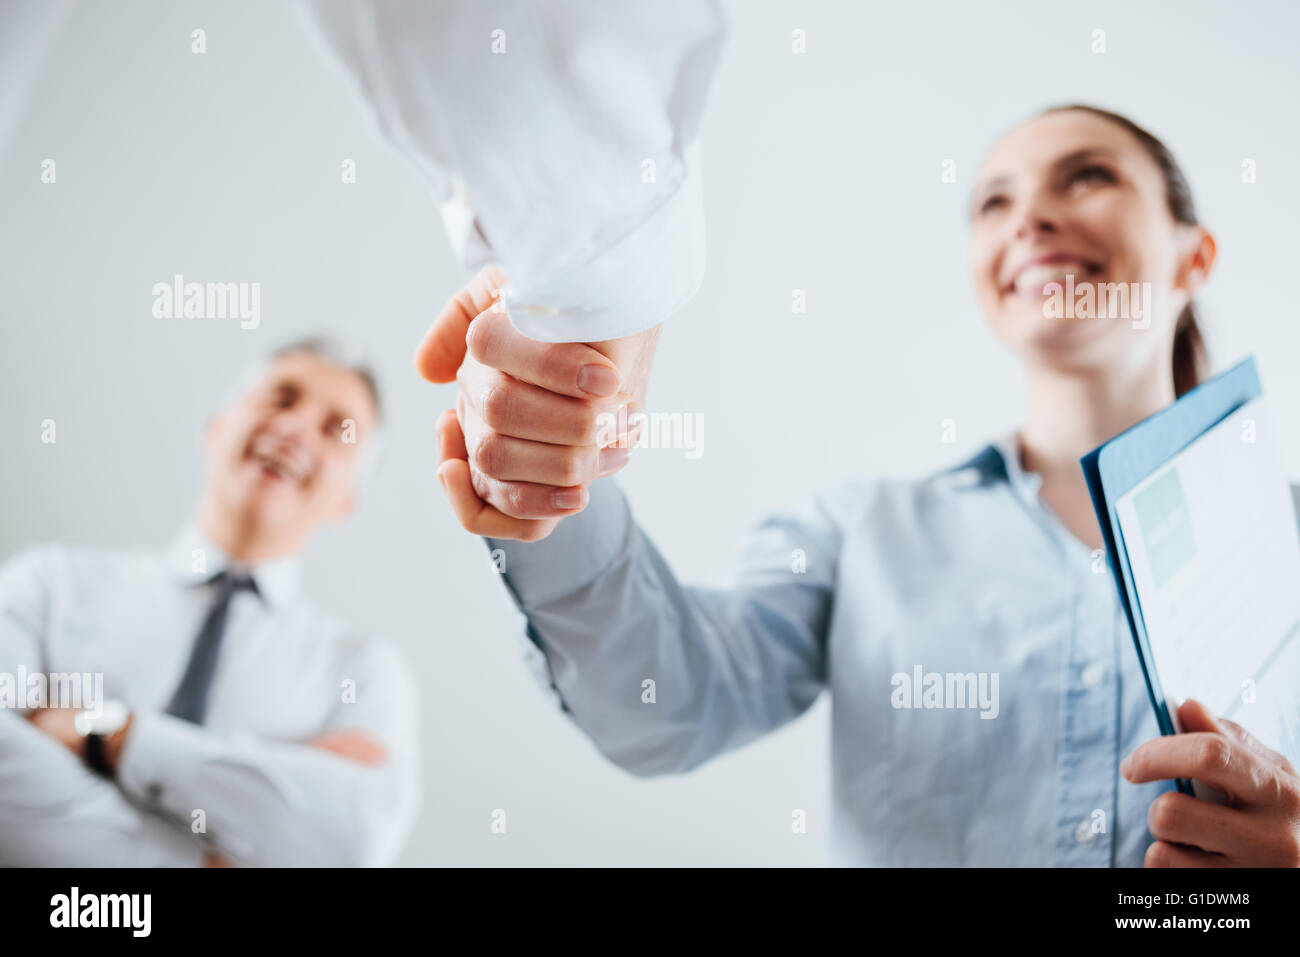 Confident business people shaking hands and woman smiling, recruitment and agreement concept Stock Photo